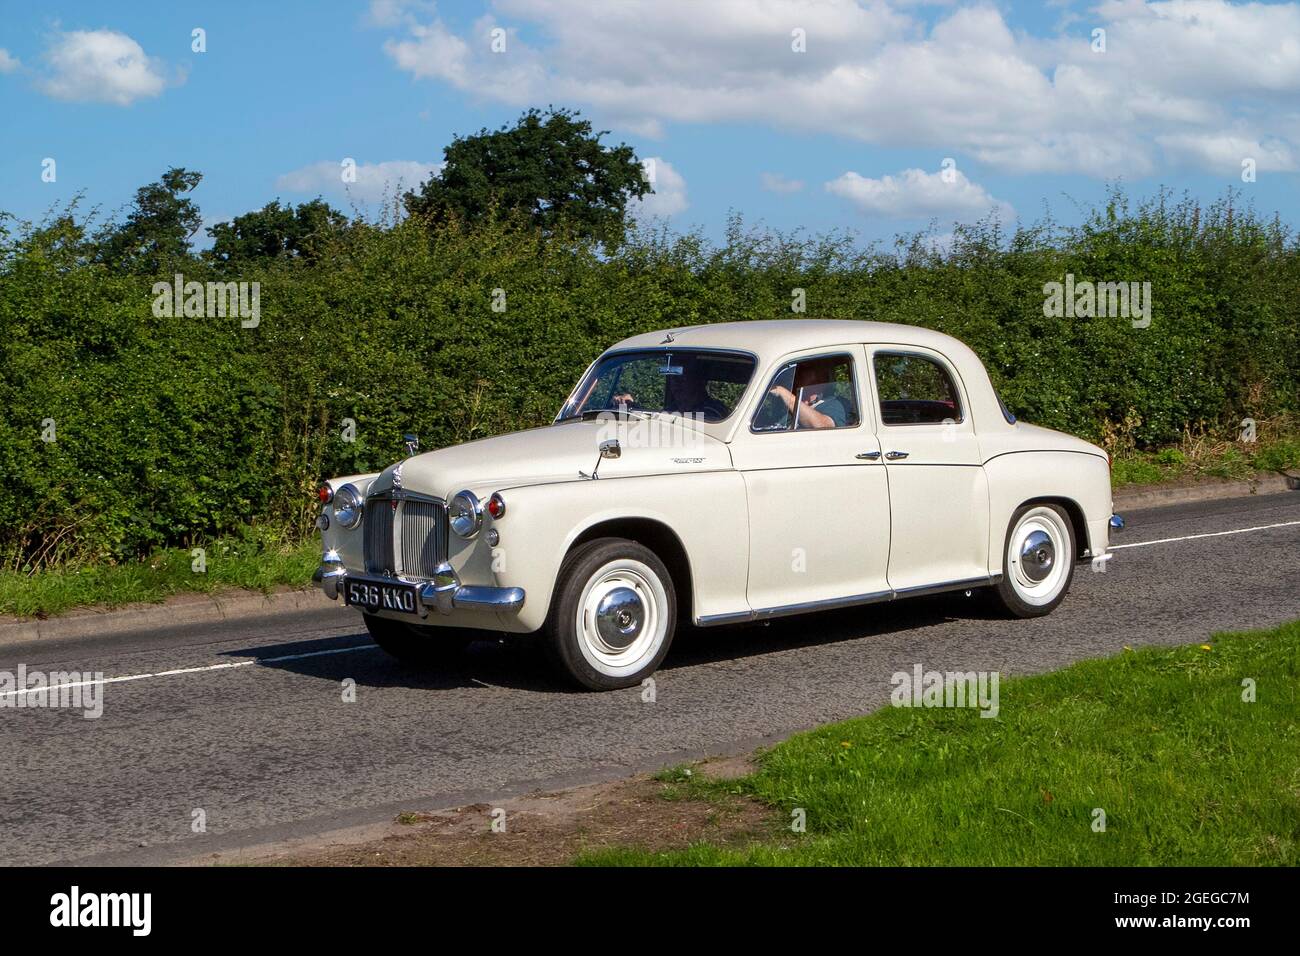 A front view of 1960s 60s white ROVER 100 white vintage classic car retro driver vehicle automobile Stock Photo